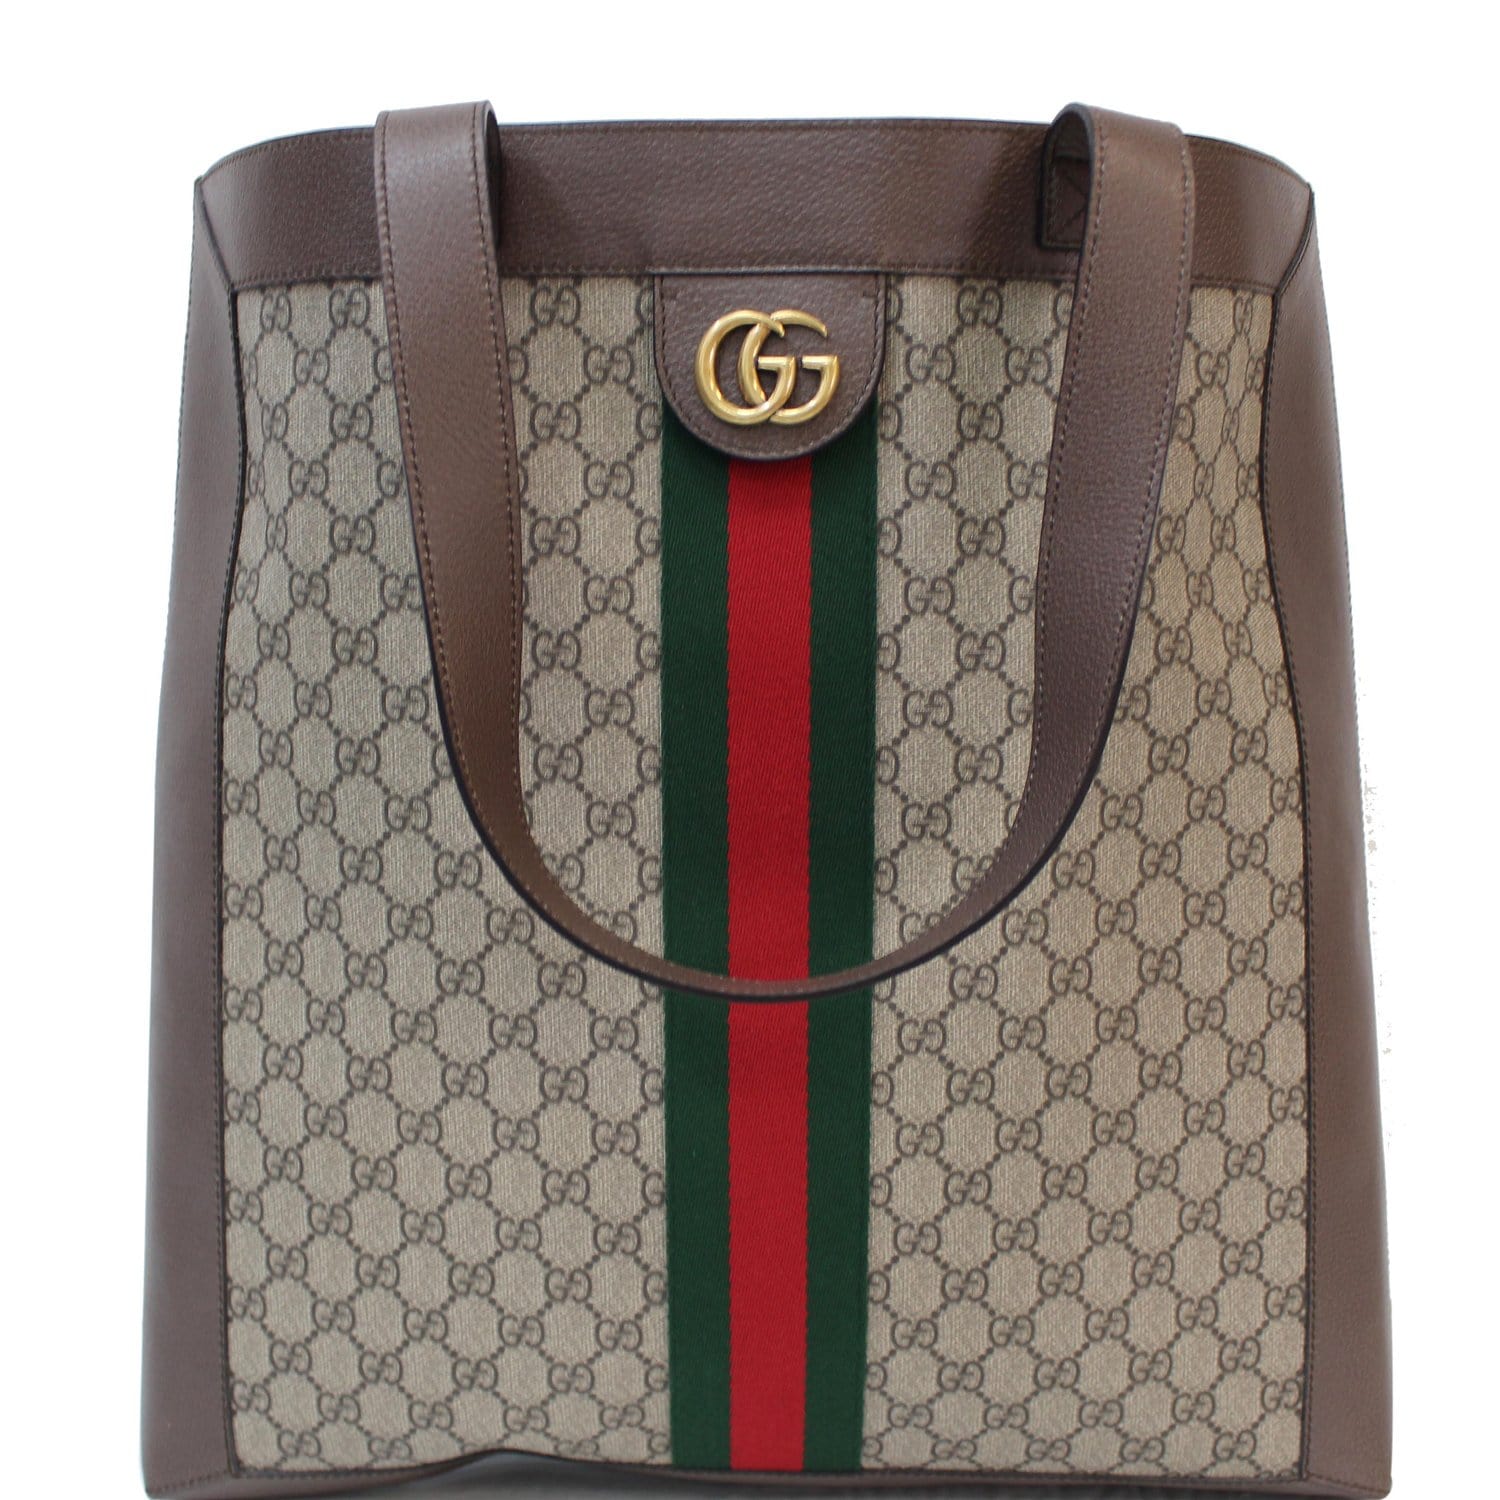 Gucci, Bags, Authentic Gucci Ophidia Gg Large Tote Bag